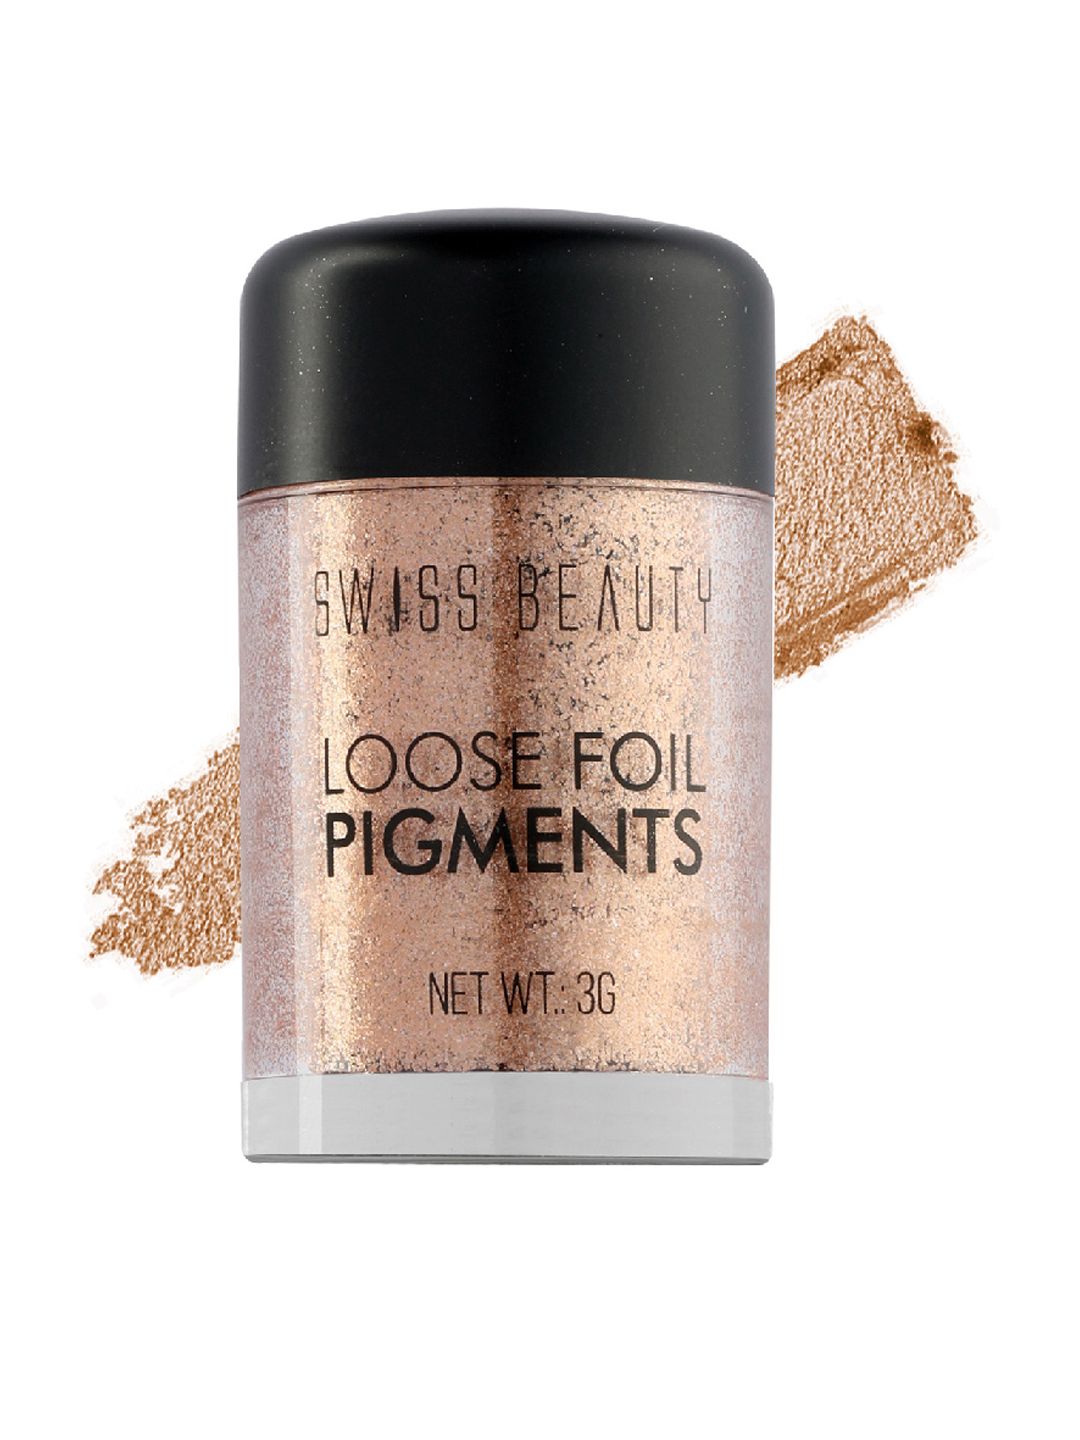 SWISS BEAUTY Loose Foil Pigments Eyeshadow -9, 3g Price in India